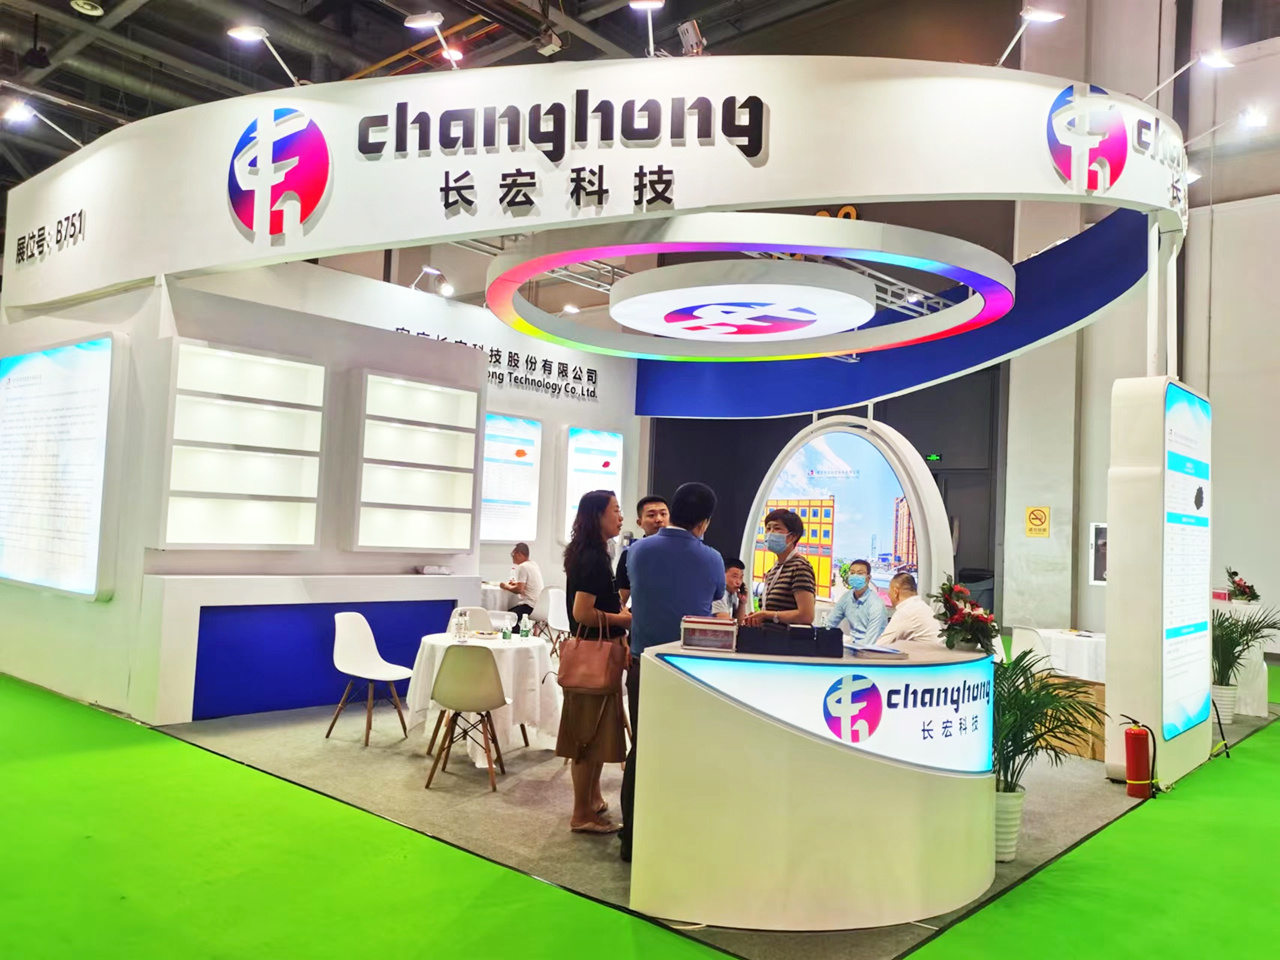 Anqing Changhong Technology Co., Ltd. participated in the 21st International Dye Industry, Organic Pigments and Textile Chemicals Exhibition